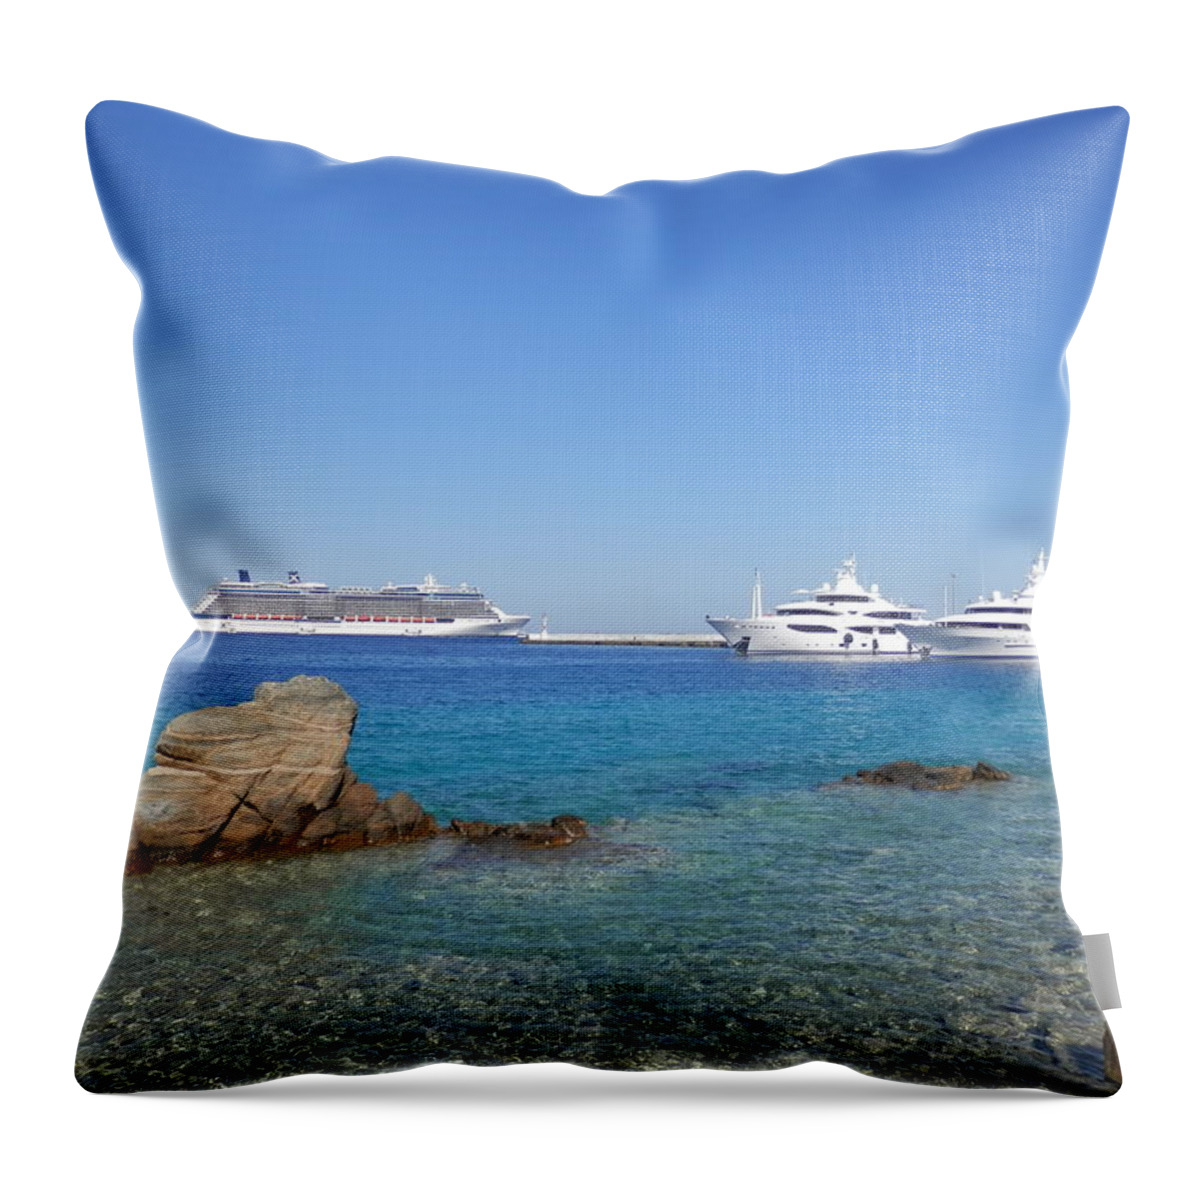 Ship Throw Pillow featuring the photograph Anchored Ships by Pema Hou